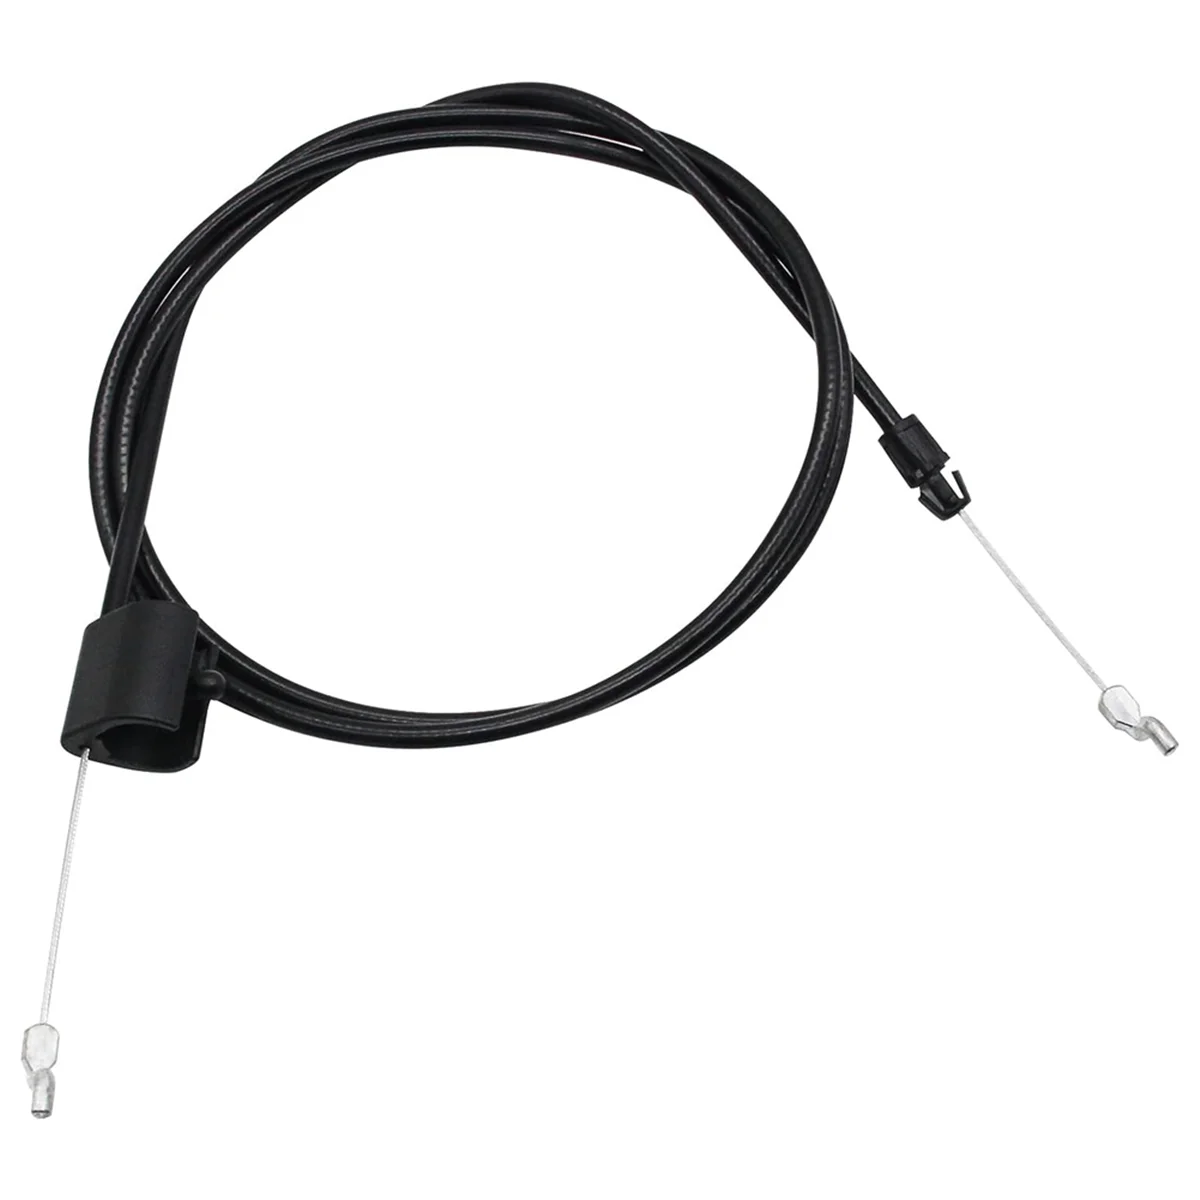 

Cable Length:61 1/2In,Conduit Length: 54 1/2In 183567 Engine Brake Zone Control Cable for Craftsman AYP Husqvarna Poulan